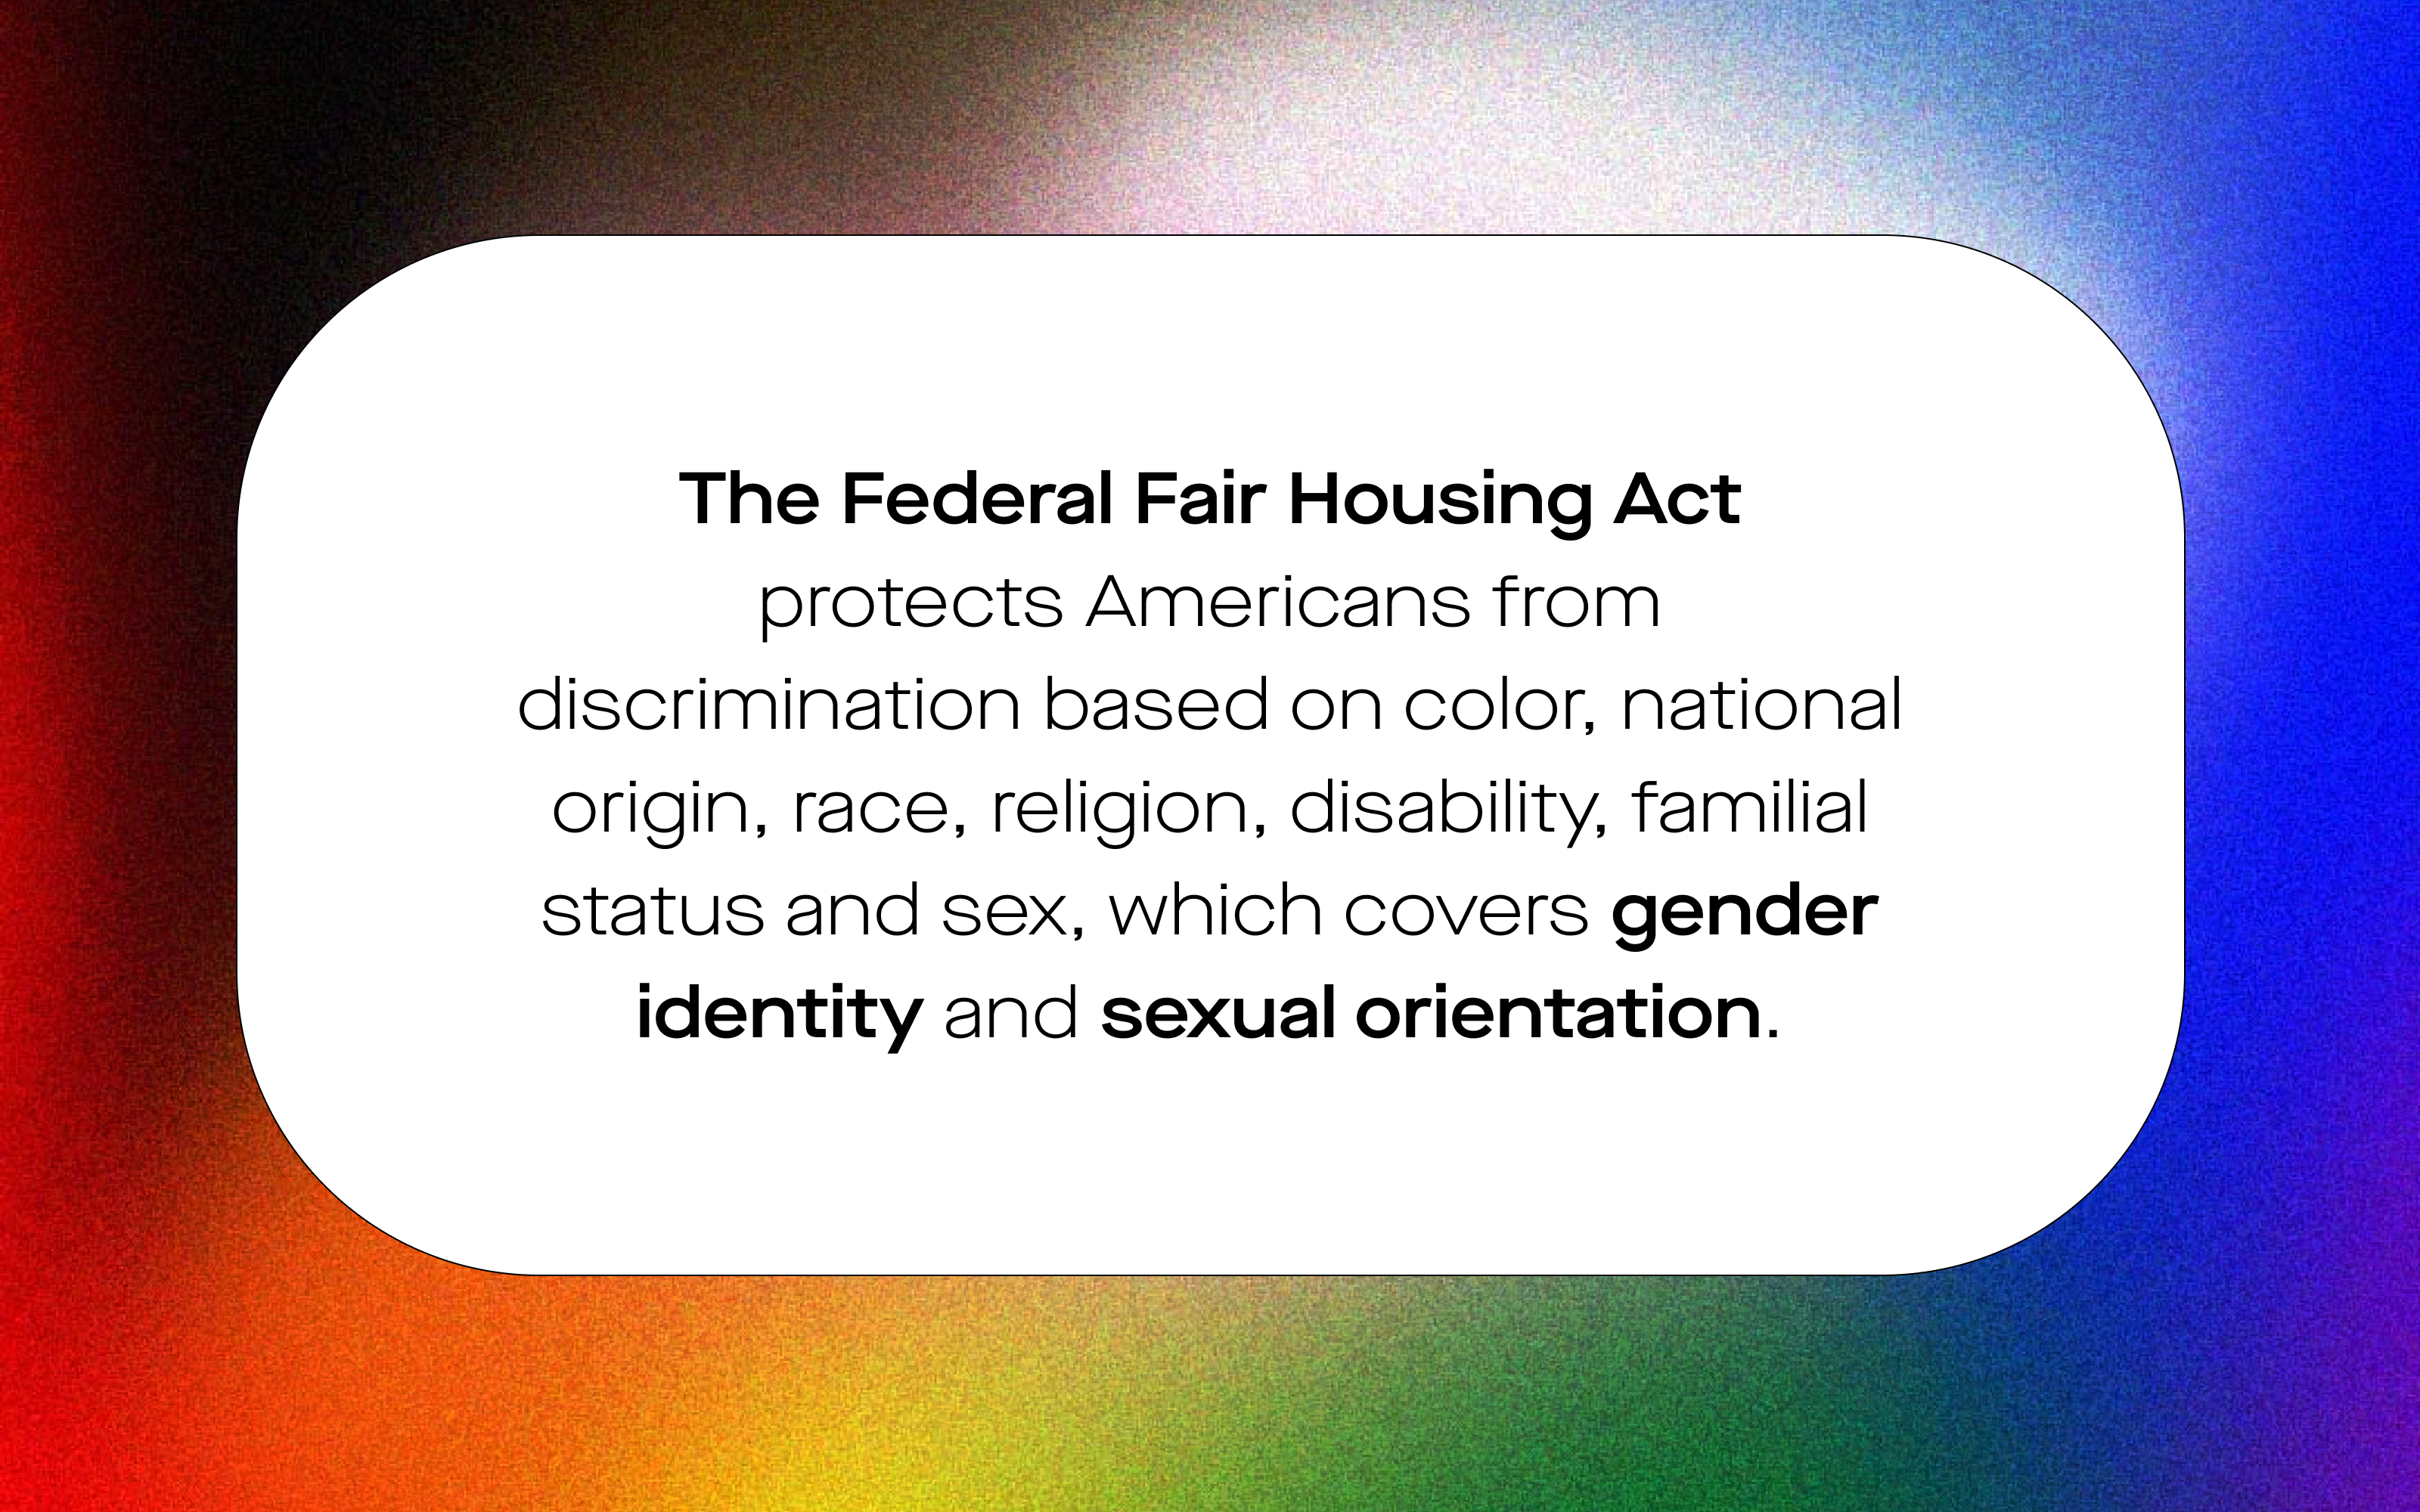 Image of federal fair housing act statistic: "The Federal Fair Housing Act protects Americans from discrimination on color, national origin, race, religion, disability, familial status and sex, which covers gender identity and sexual orientation."